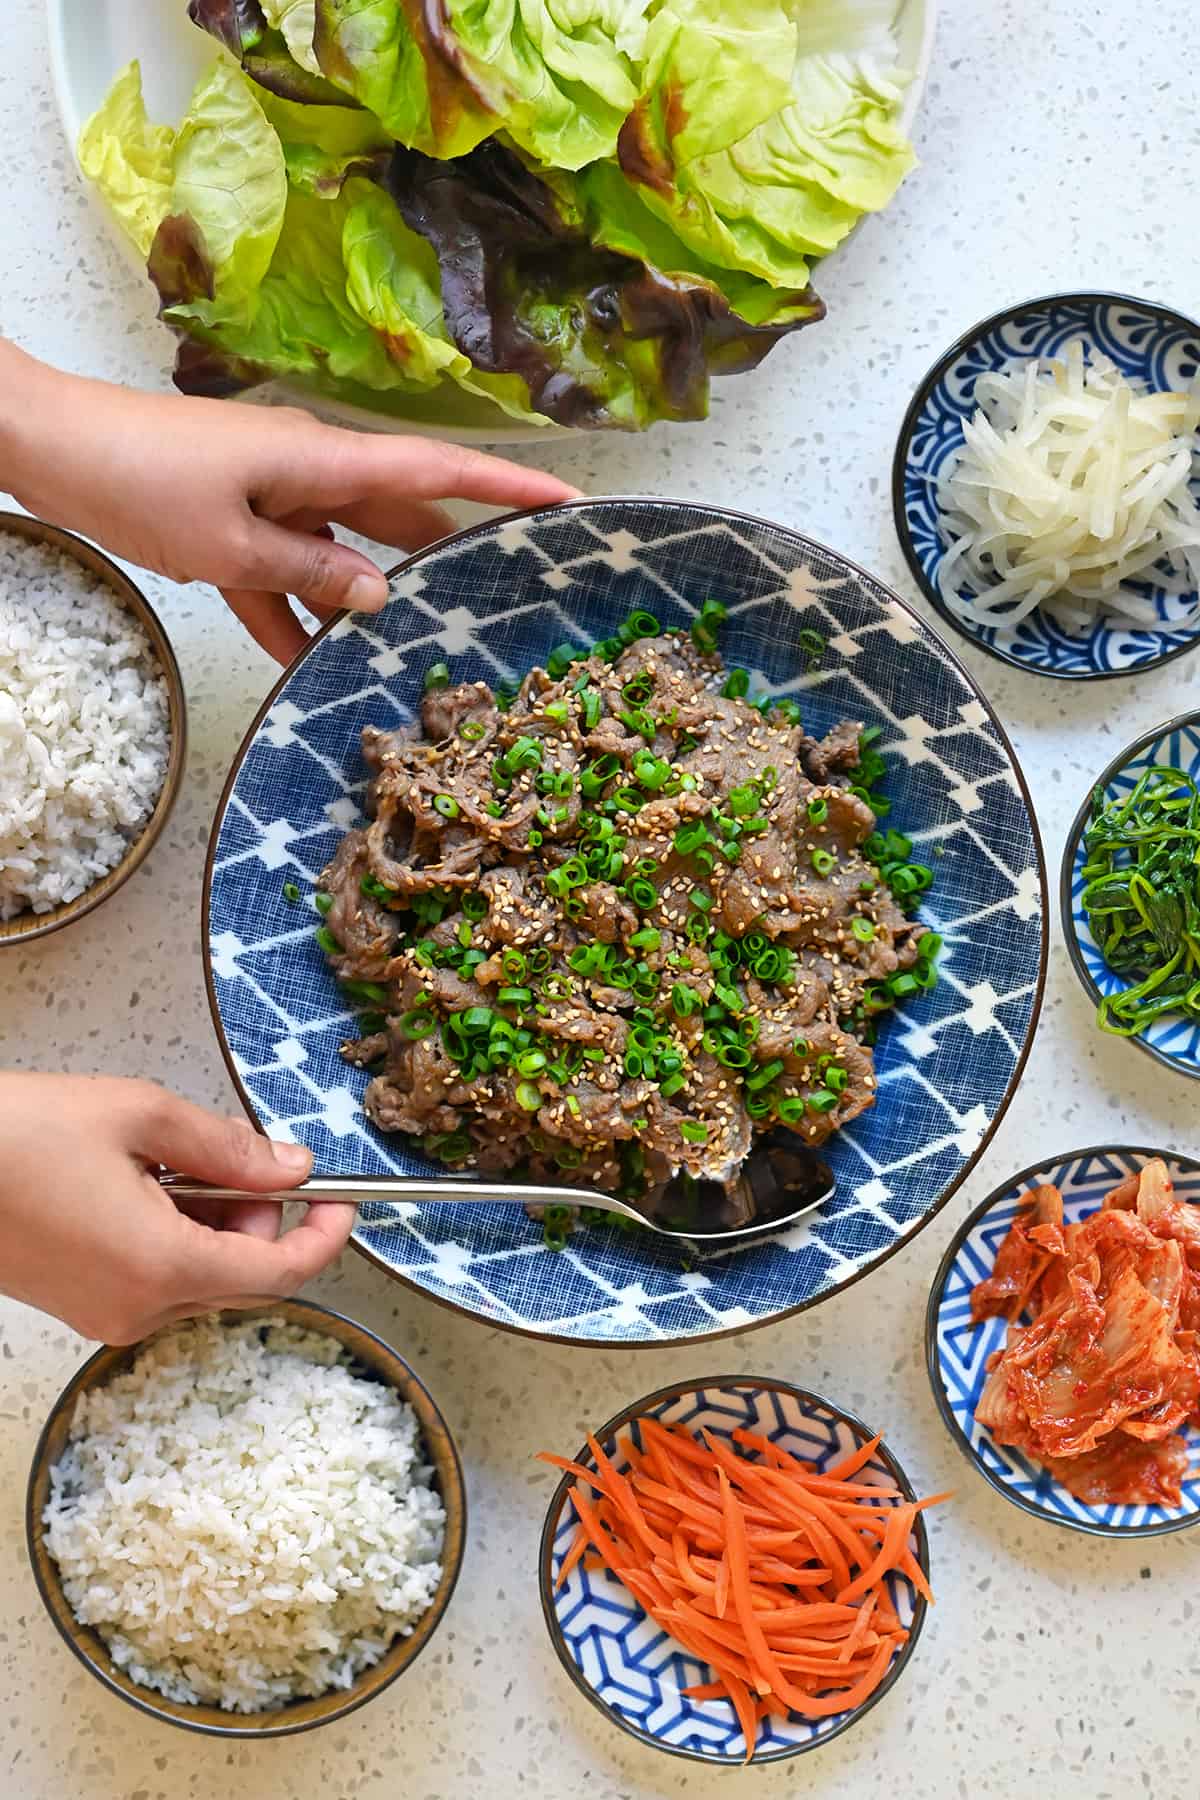 A hand is placing a serving spoon into a bowl of paleo bulgogi. There are small bowls of vegetables and steamed rice surrounding the beef.